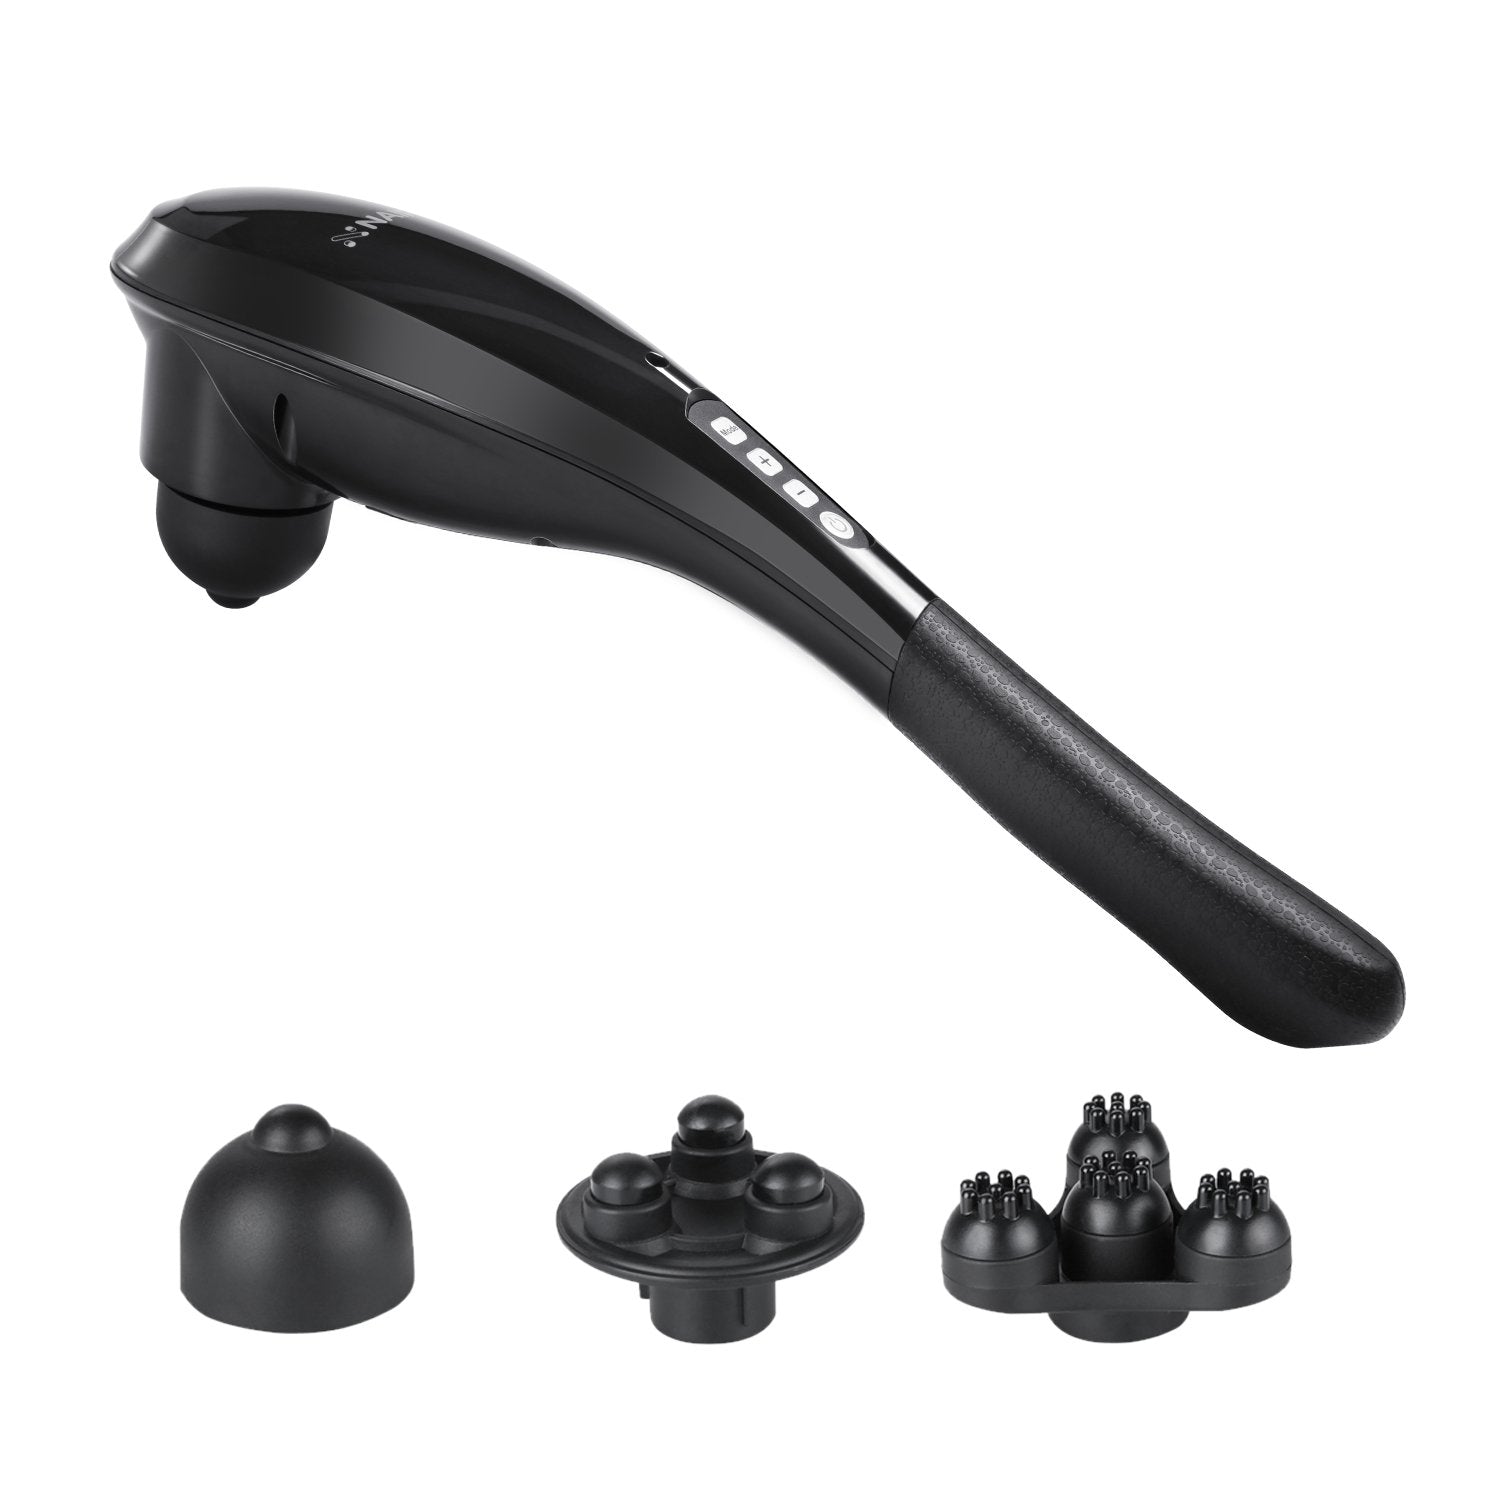 Load image into Gallery viewer, Naipo Cordless Percussion Massager with Multi-Speed Vibration - NAIPO
